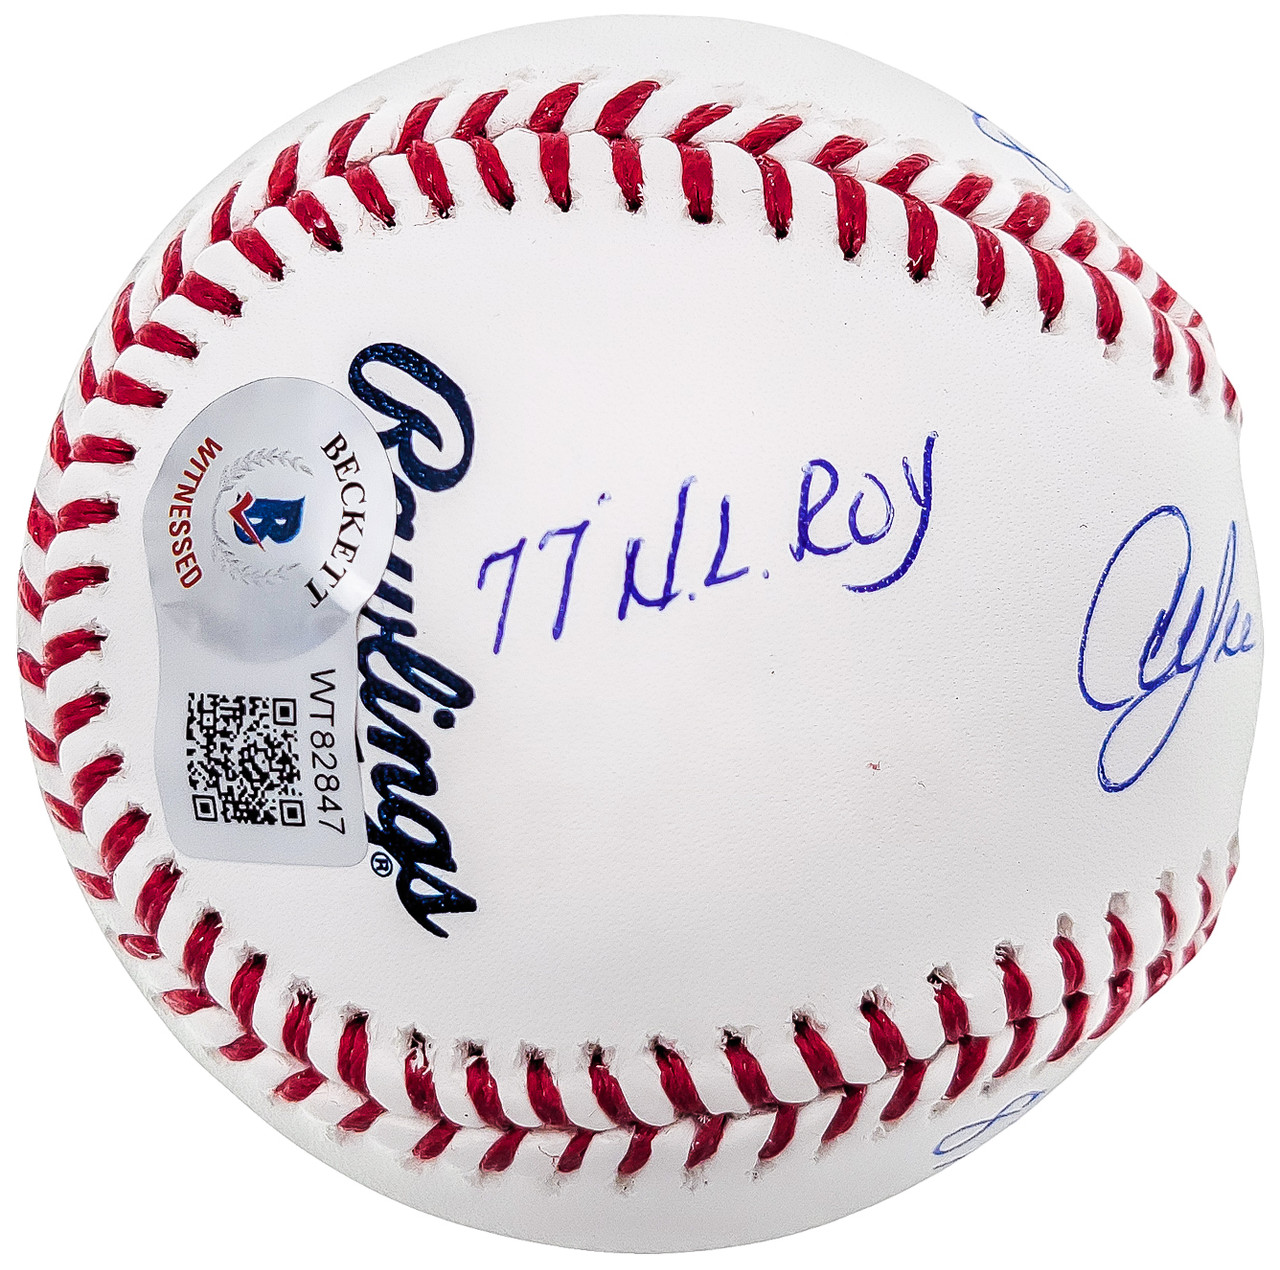 Andre Dawson Montreal Expos Signed Autograph MLB Custom Blue